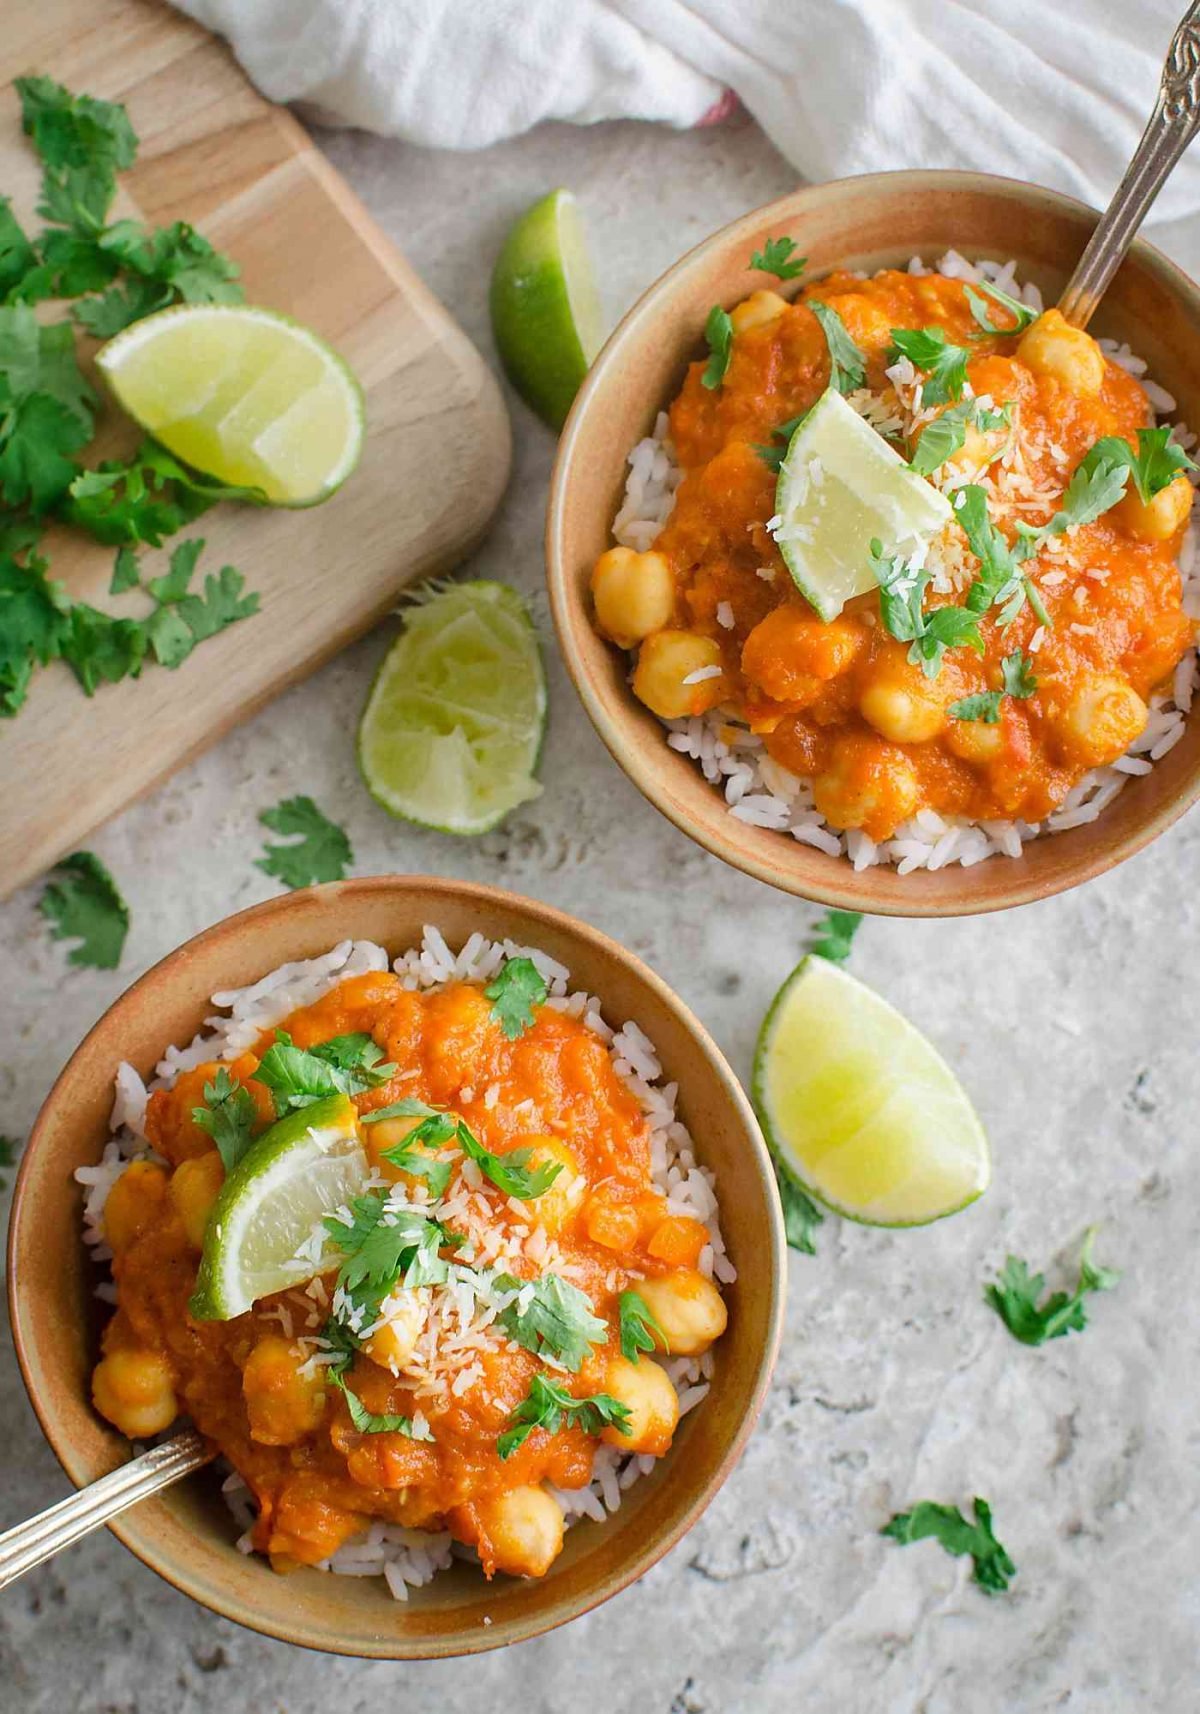 Coconut chickpea curry garnished with fresh cilantro and lime wedges in two serving bowls with metal spoon.